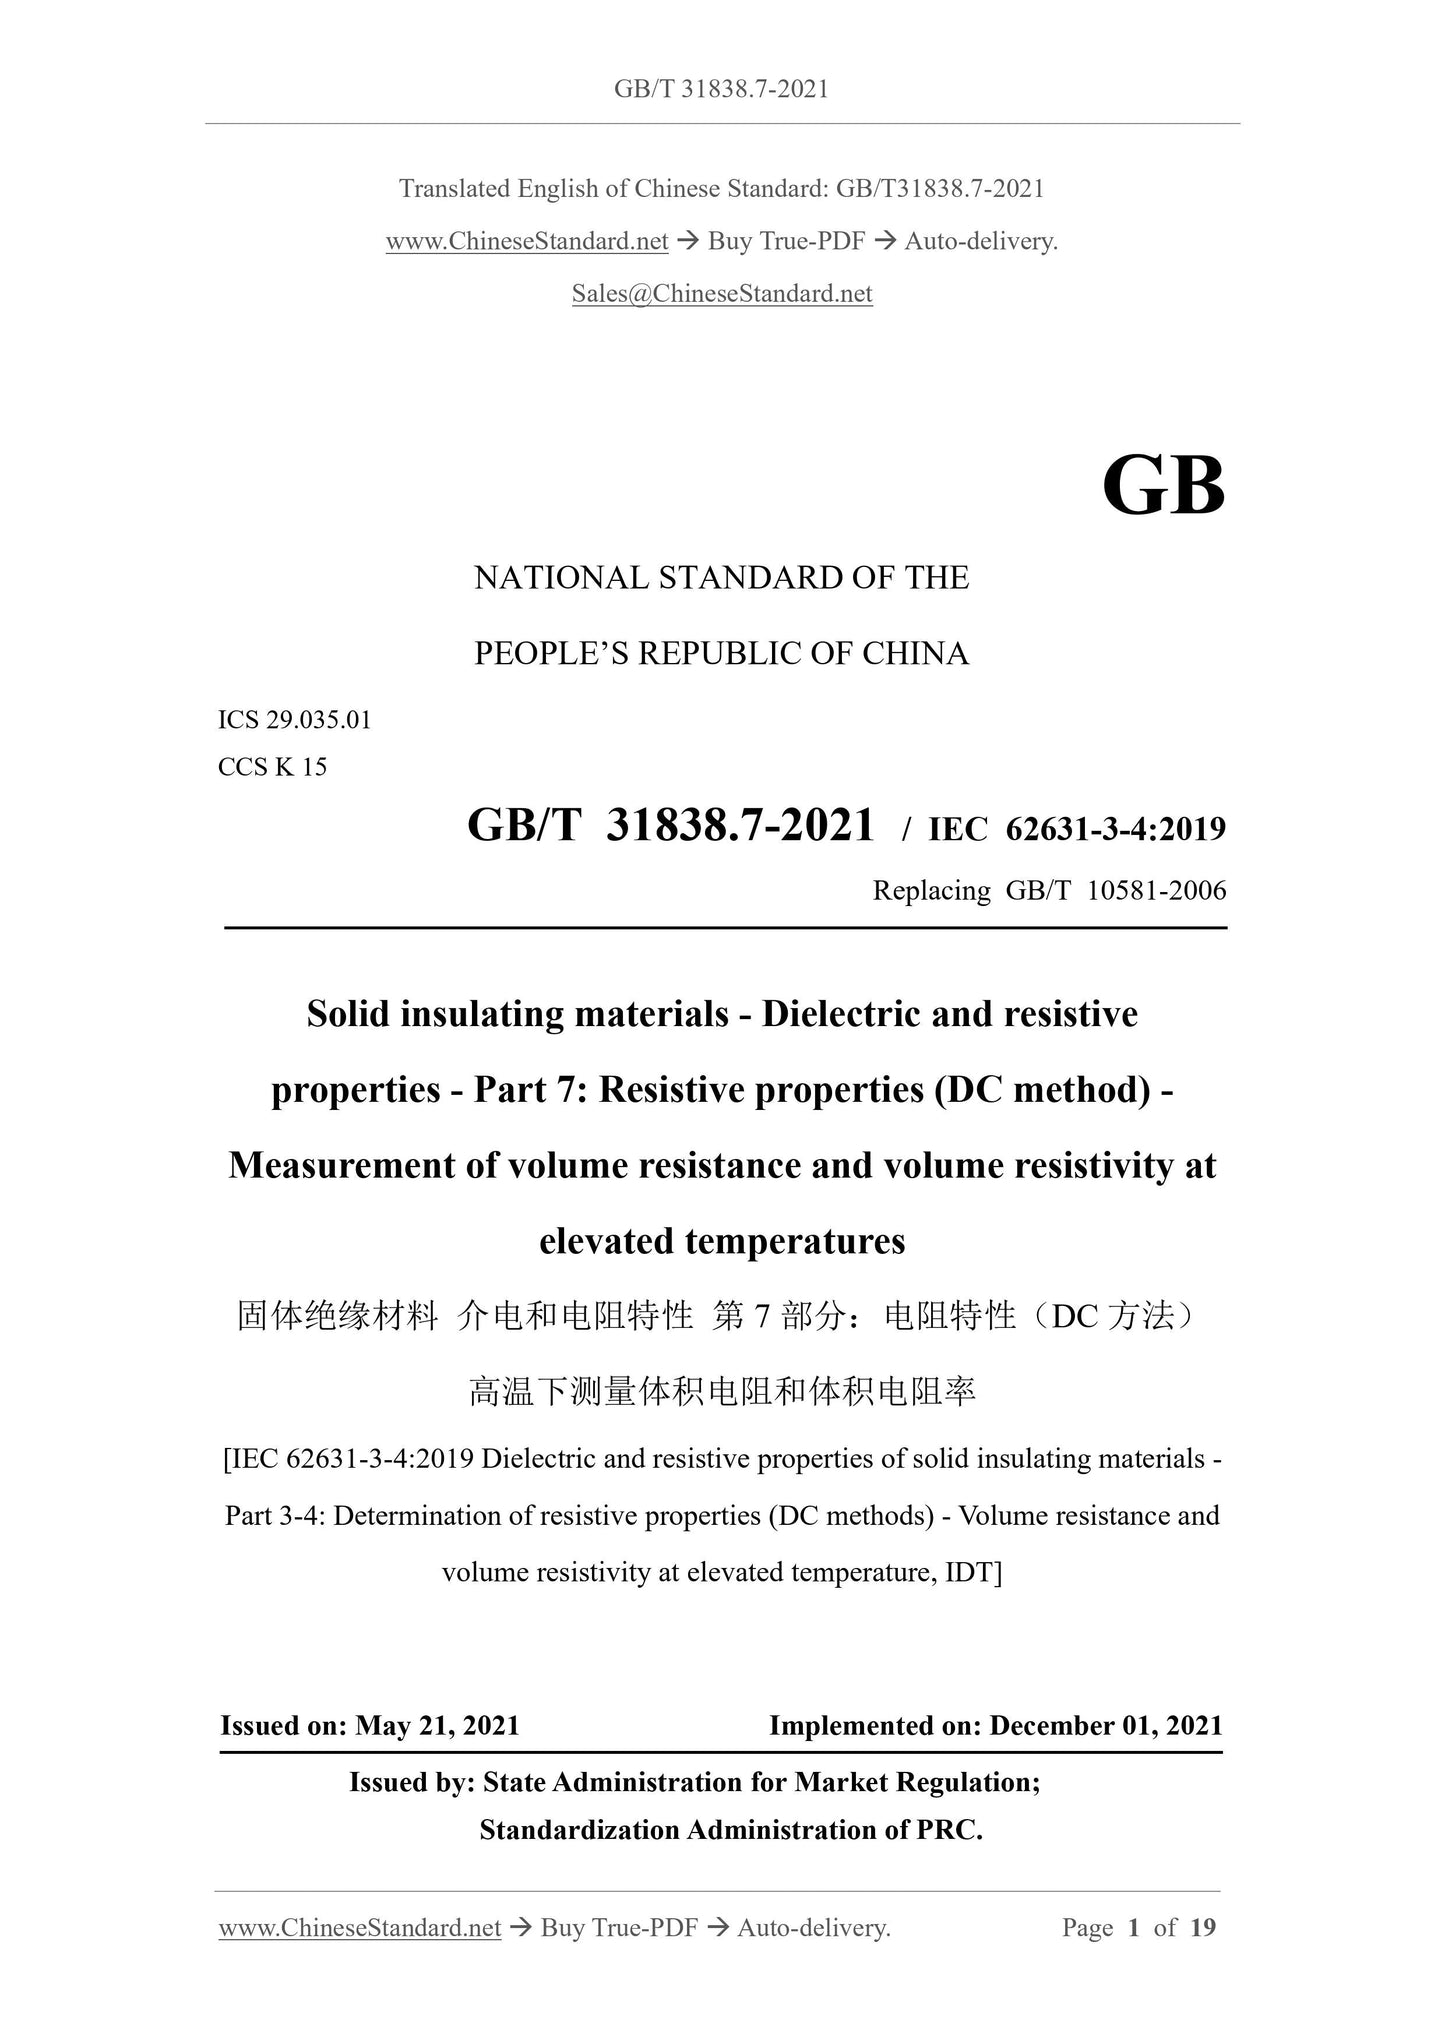 GB/T 31838.7-2021 Page 1